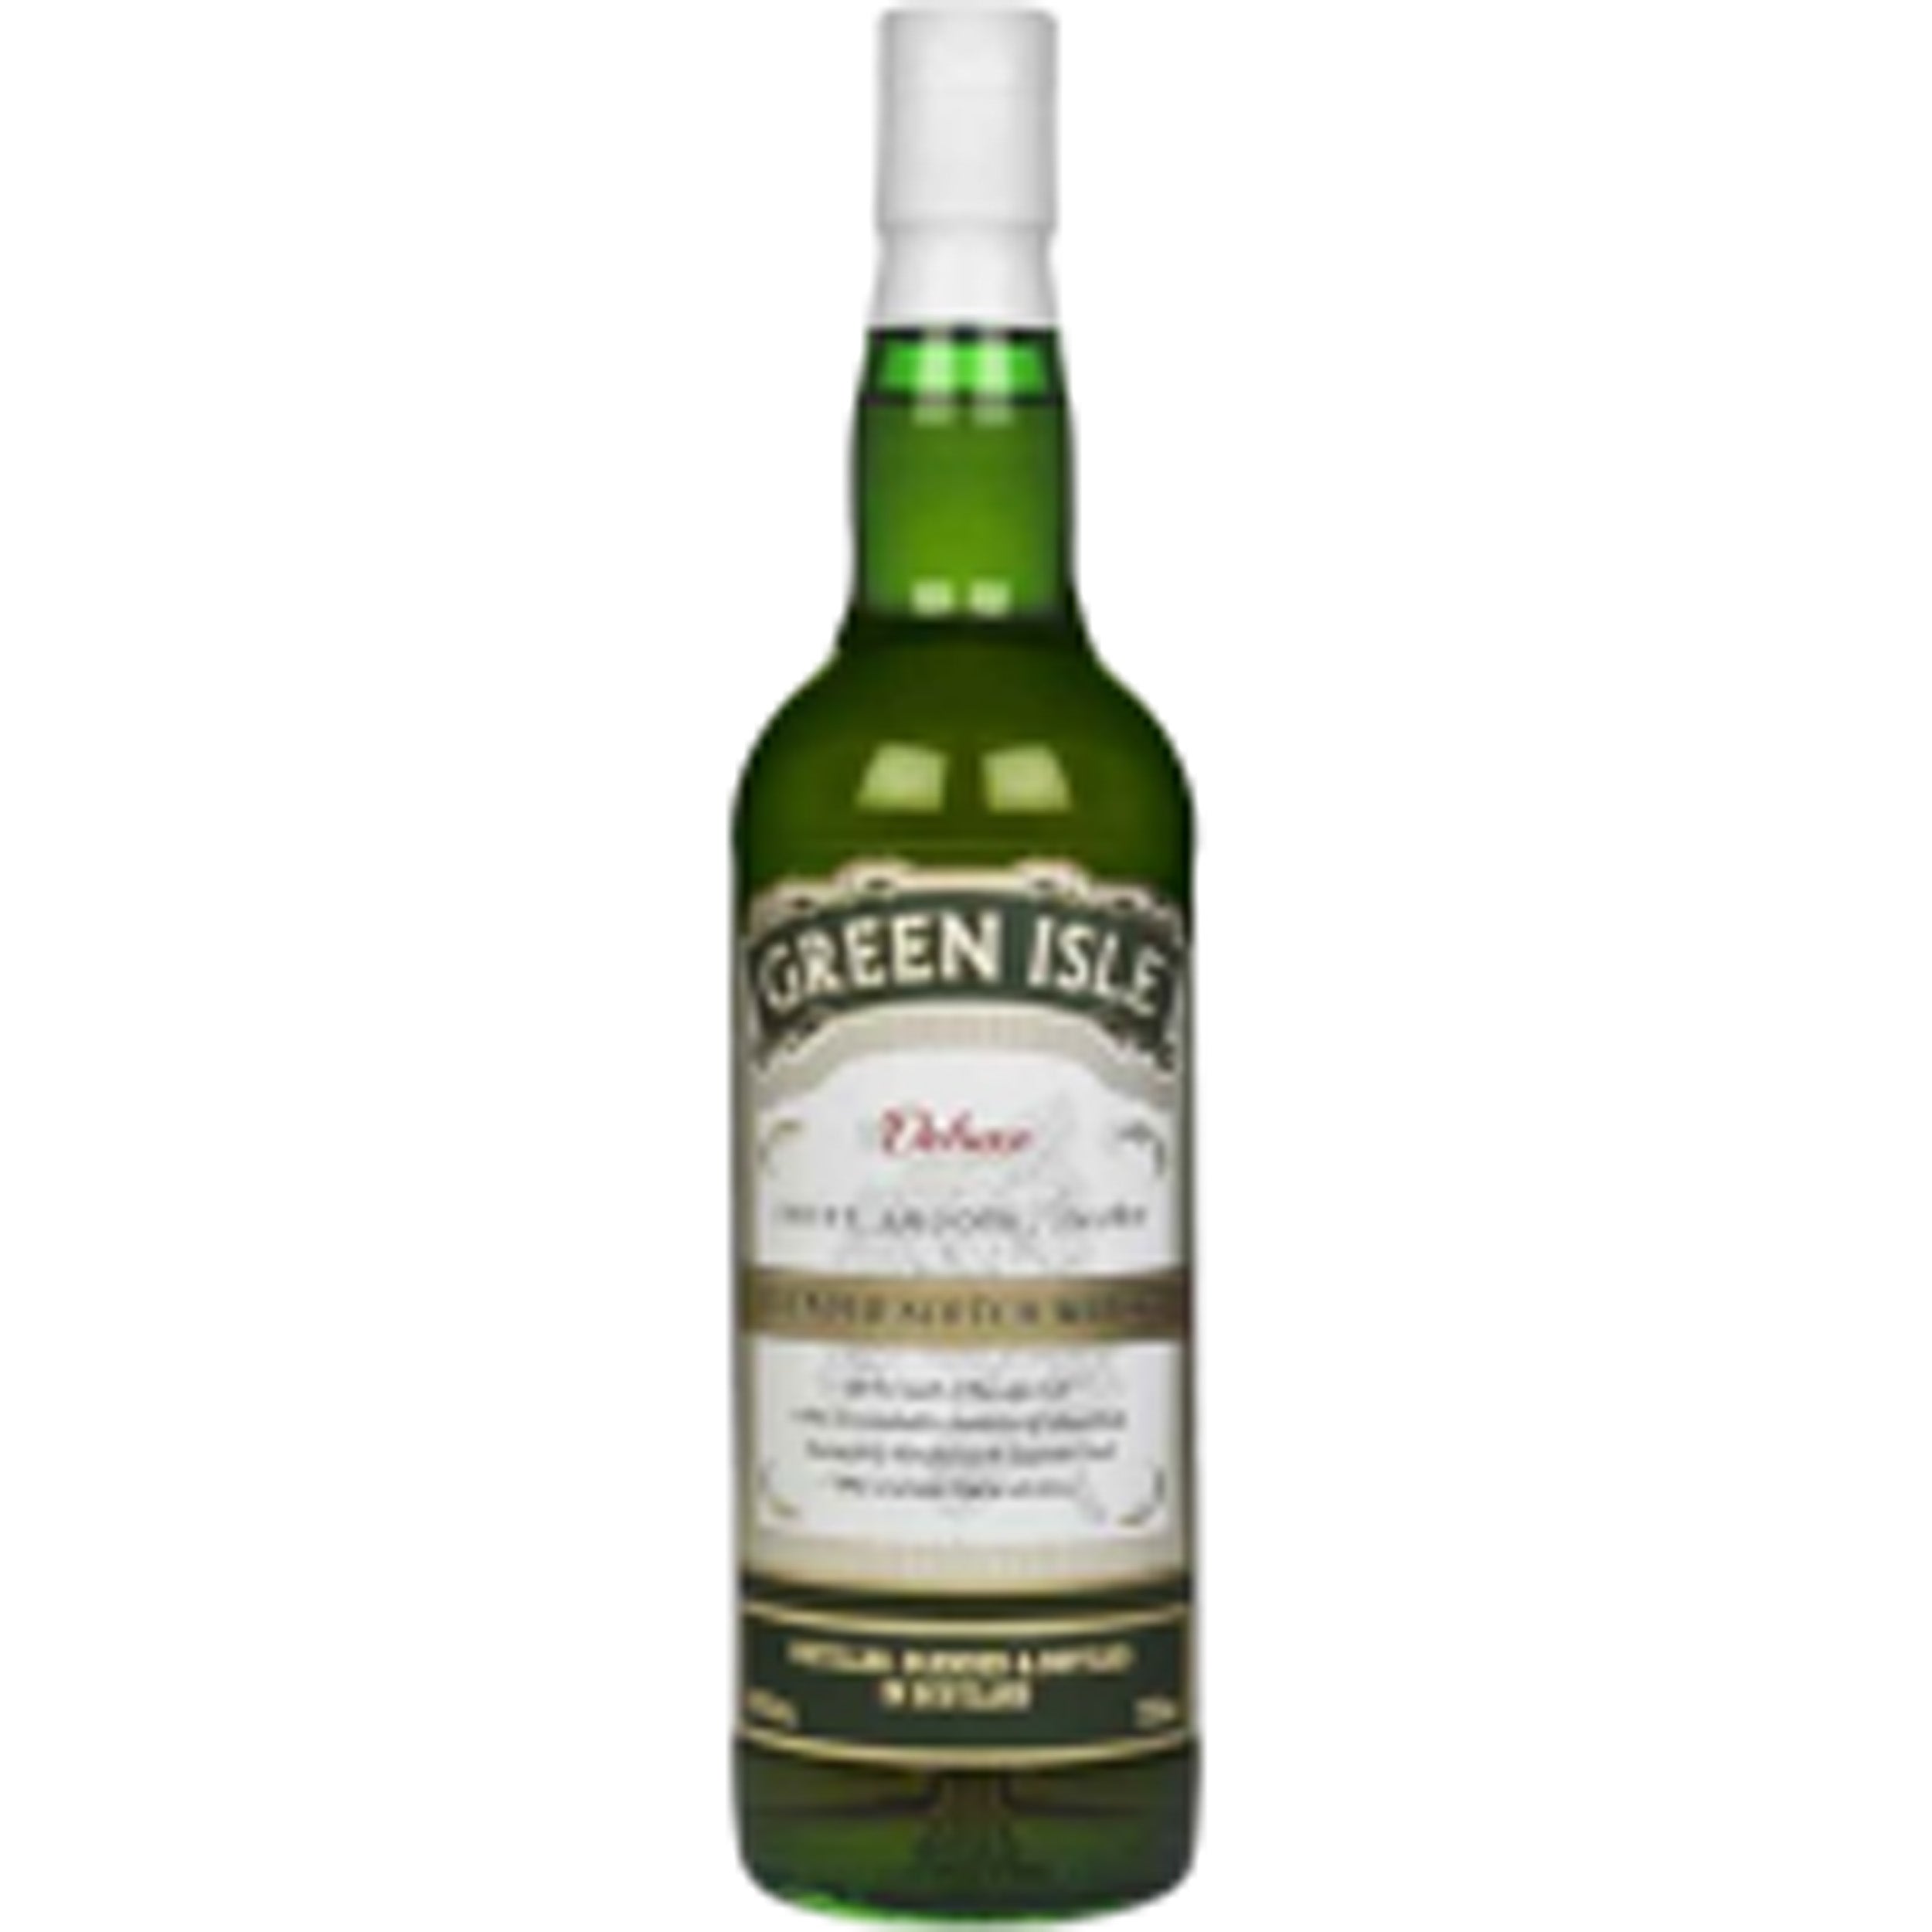 Green Isle Deluxe Blended Scotch Whisky